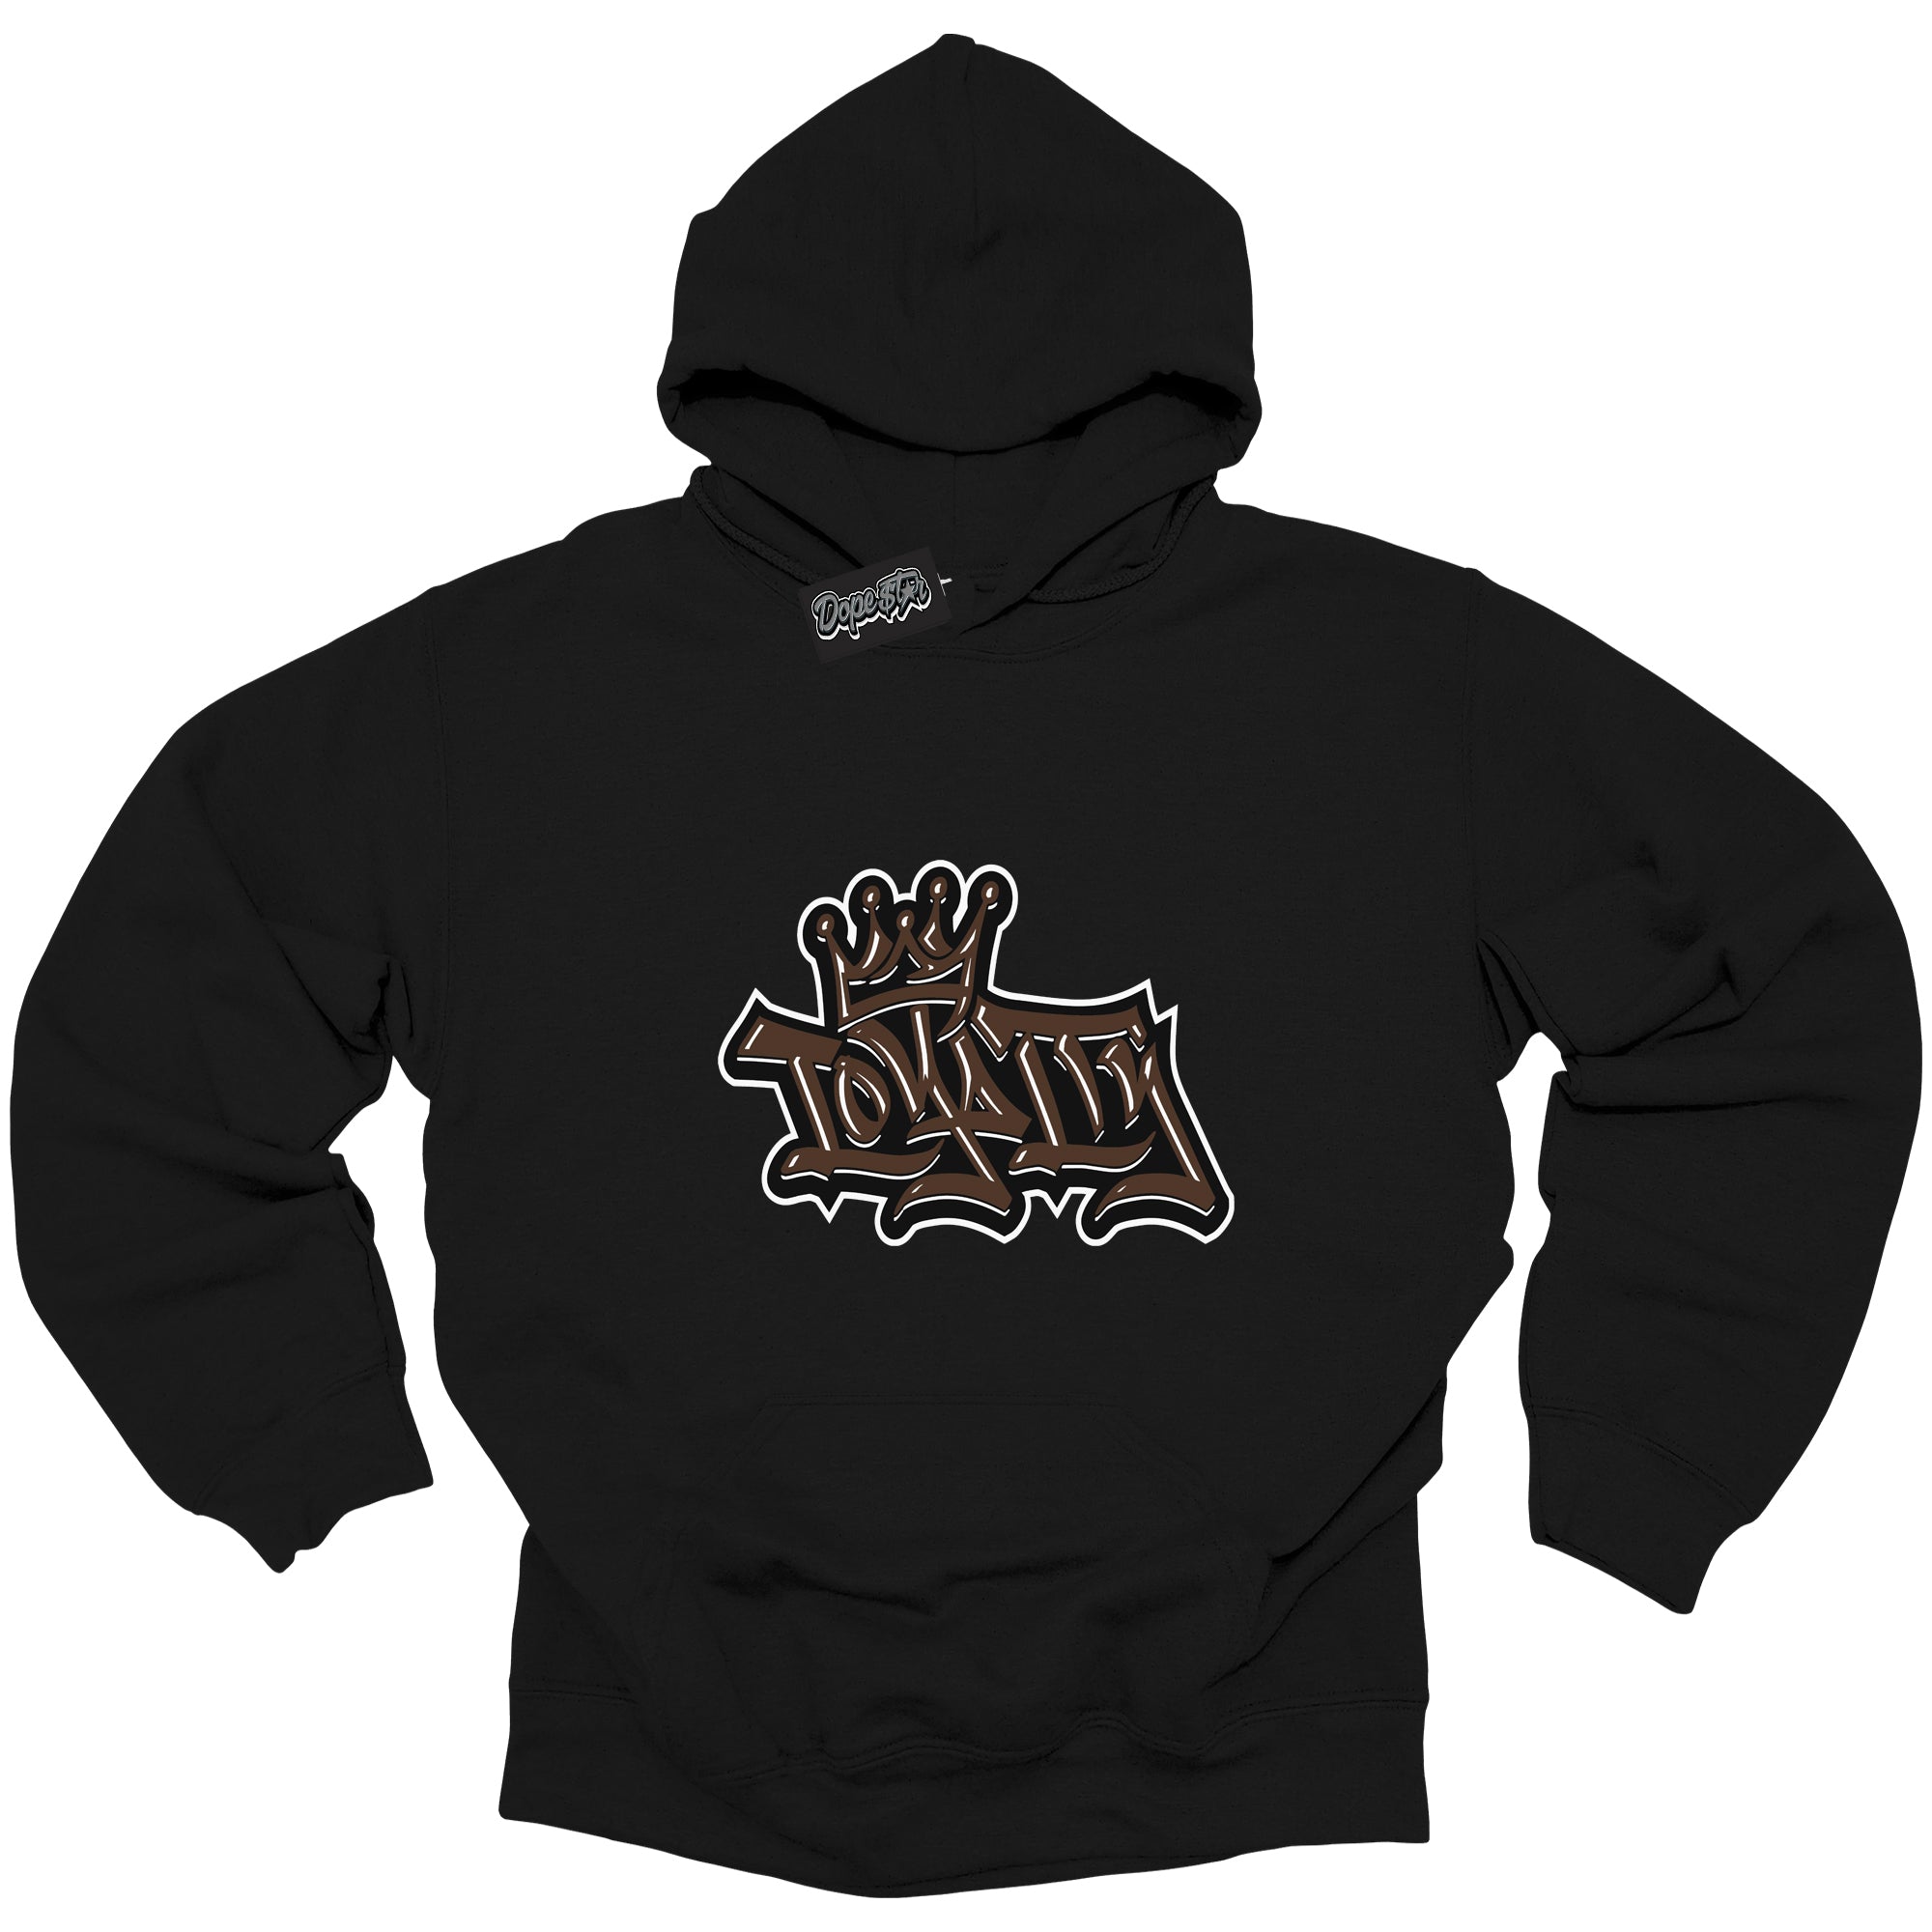 Cool Black Graphic DopeStar Hoodie with “ Loyalty Crown “ print, that perfectly matches Palomino 1s sneakers